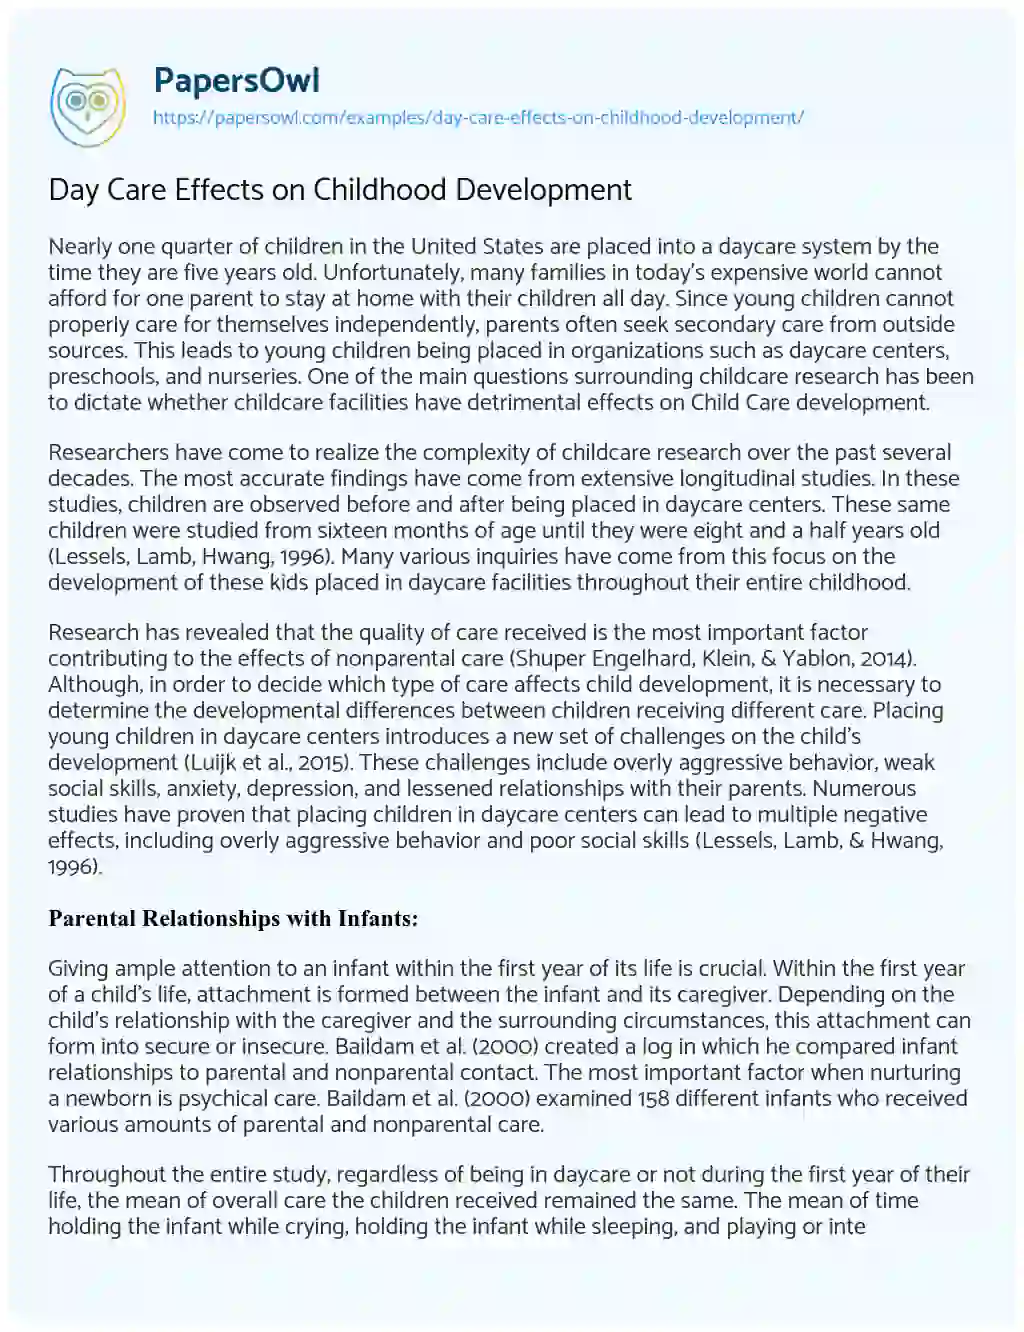 infancy and early childhood development paper